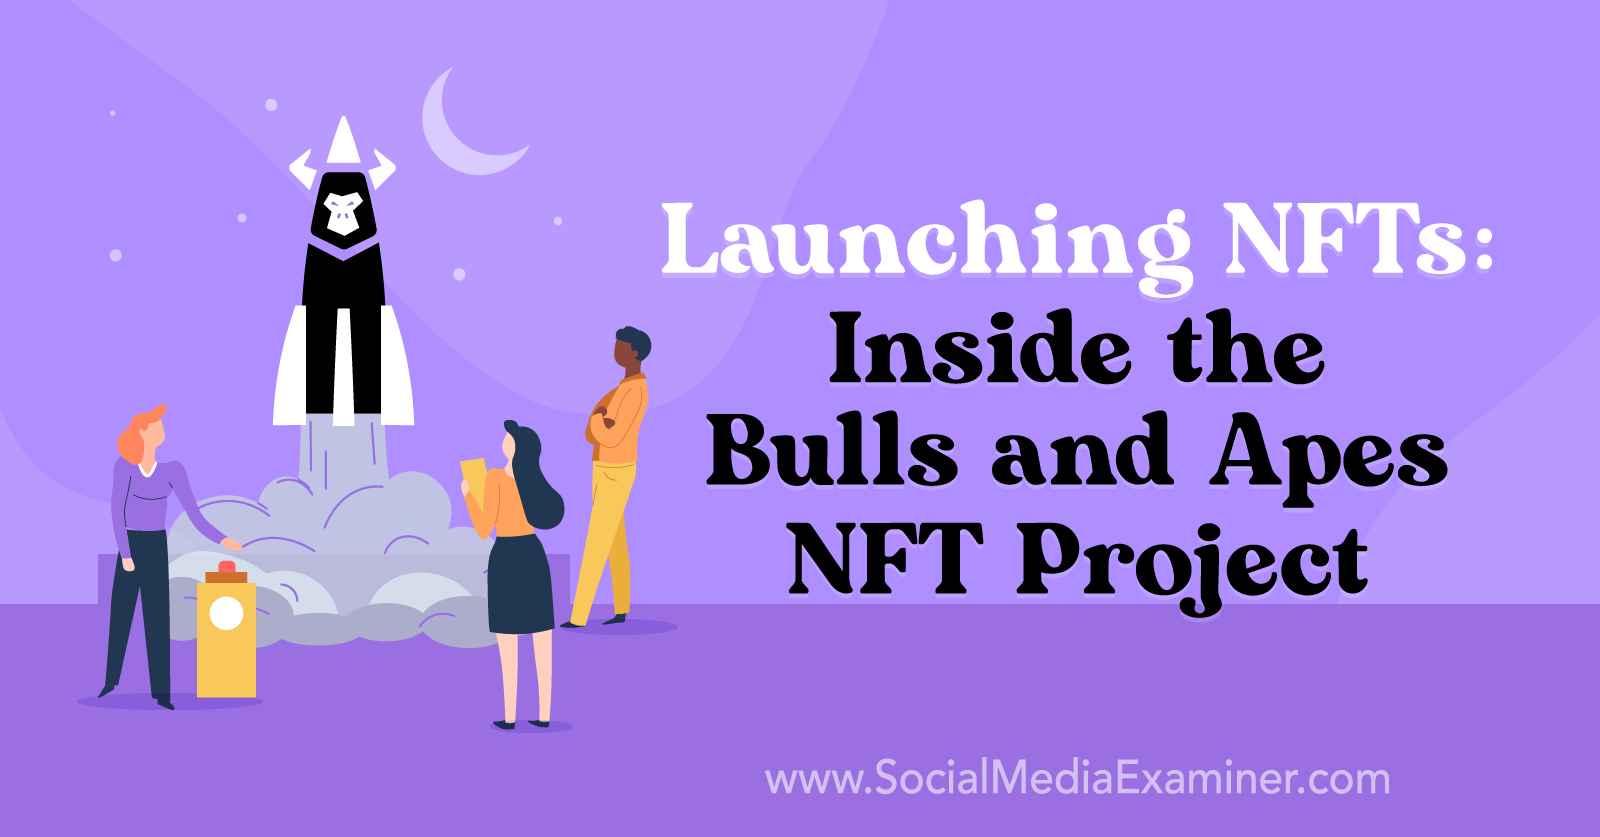 Launching NFTs: Inside the Bulls and Apes NFT Project featuring insights from Manny Coats on the Crypto Business Podcast.